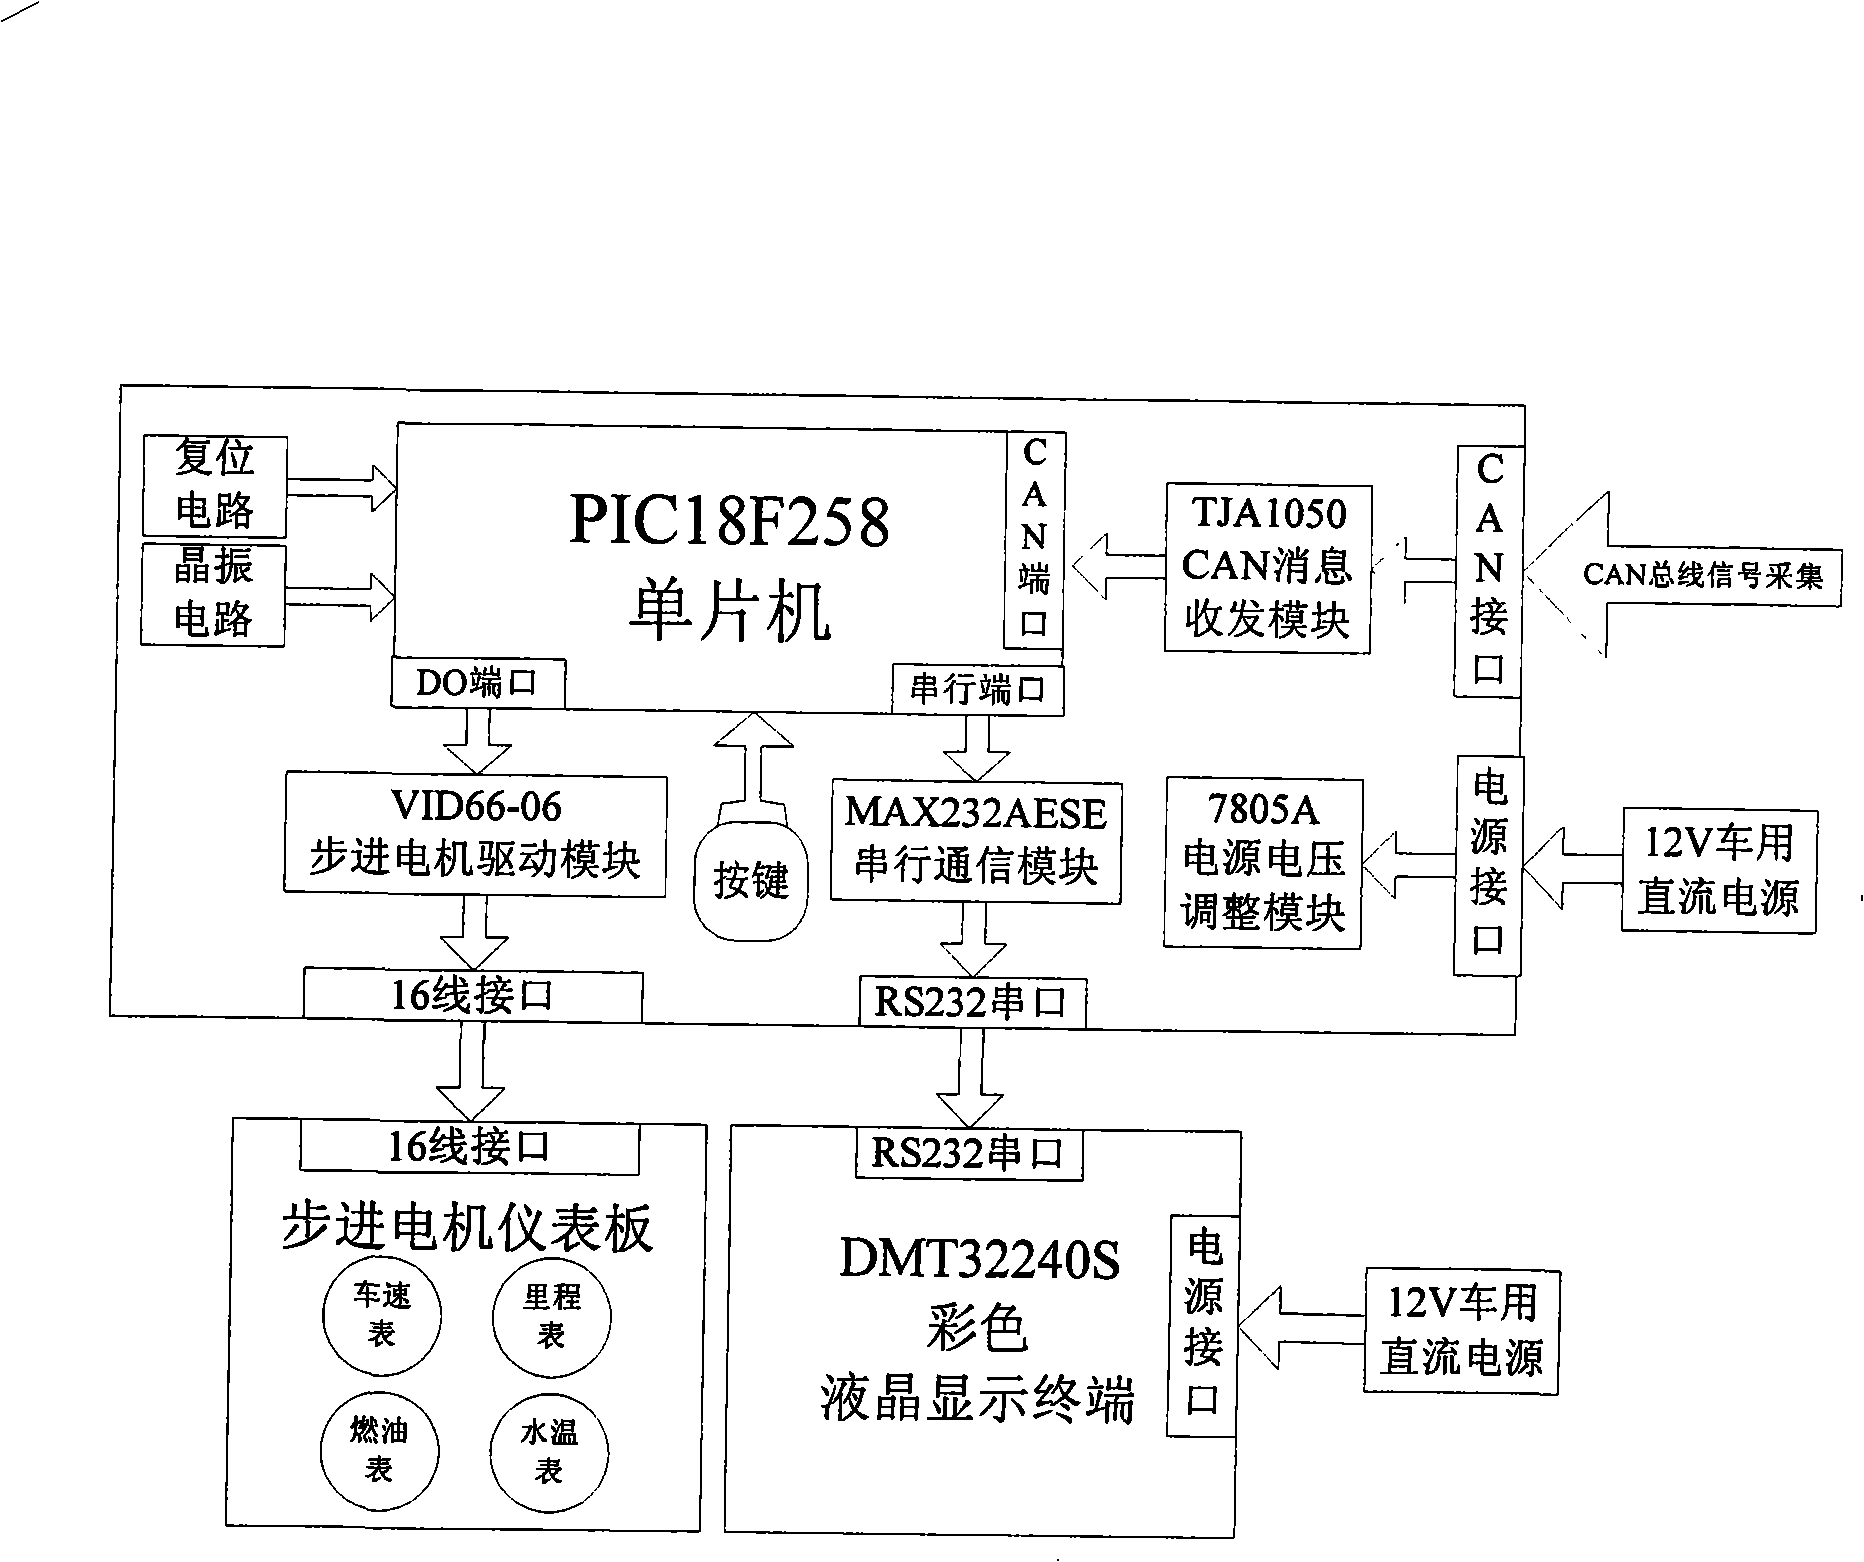 Synthetic meter system of hybrid vehicle